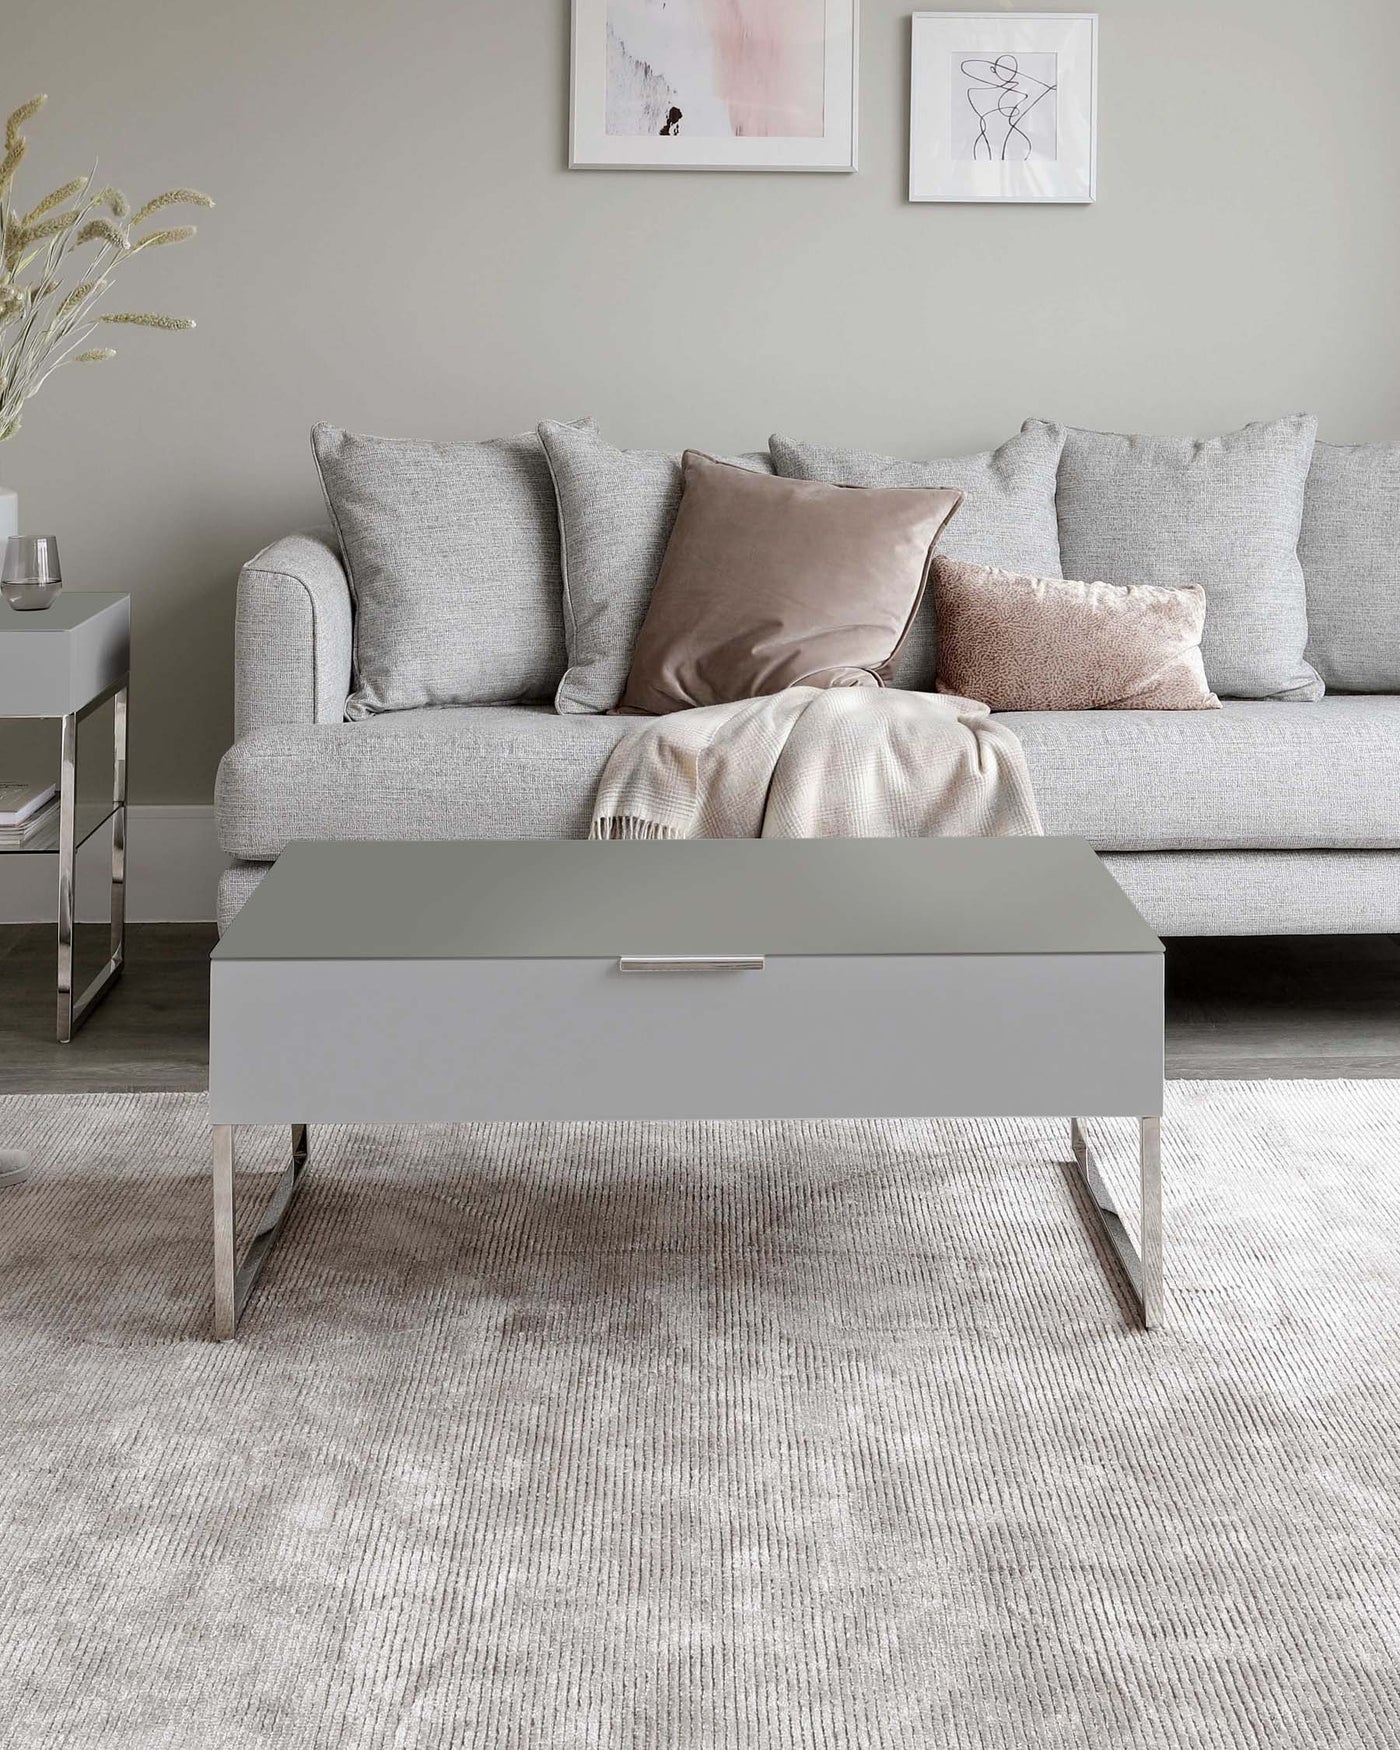 Contemporary grey fabric sectional sofa adorned with a variety of pillows in muted tones and a light throw blanket. In the foreground, a sleek grey coffee table with a minimalist design and metal legs sits atop a textured off-white area rug. A small modern side table in grey with a reflective glass tabletop is partially visible beside the couch.